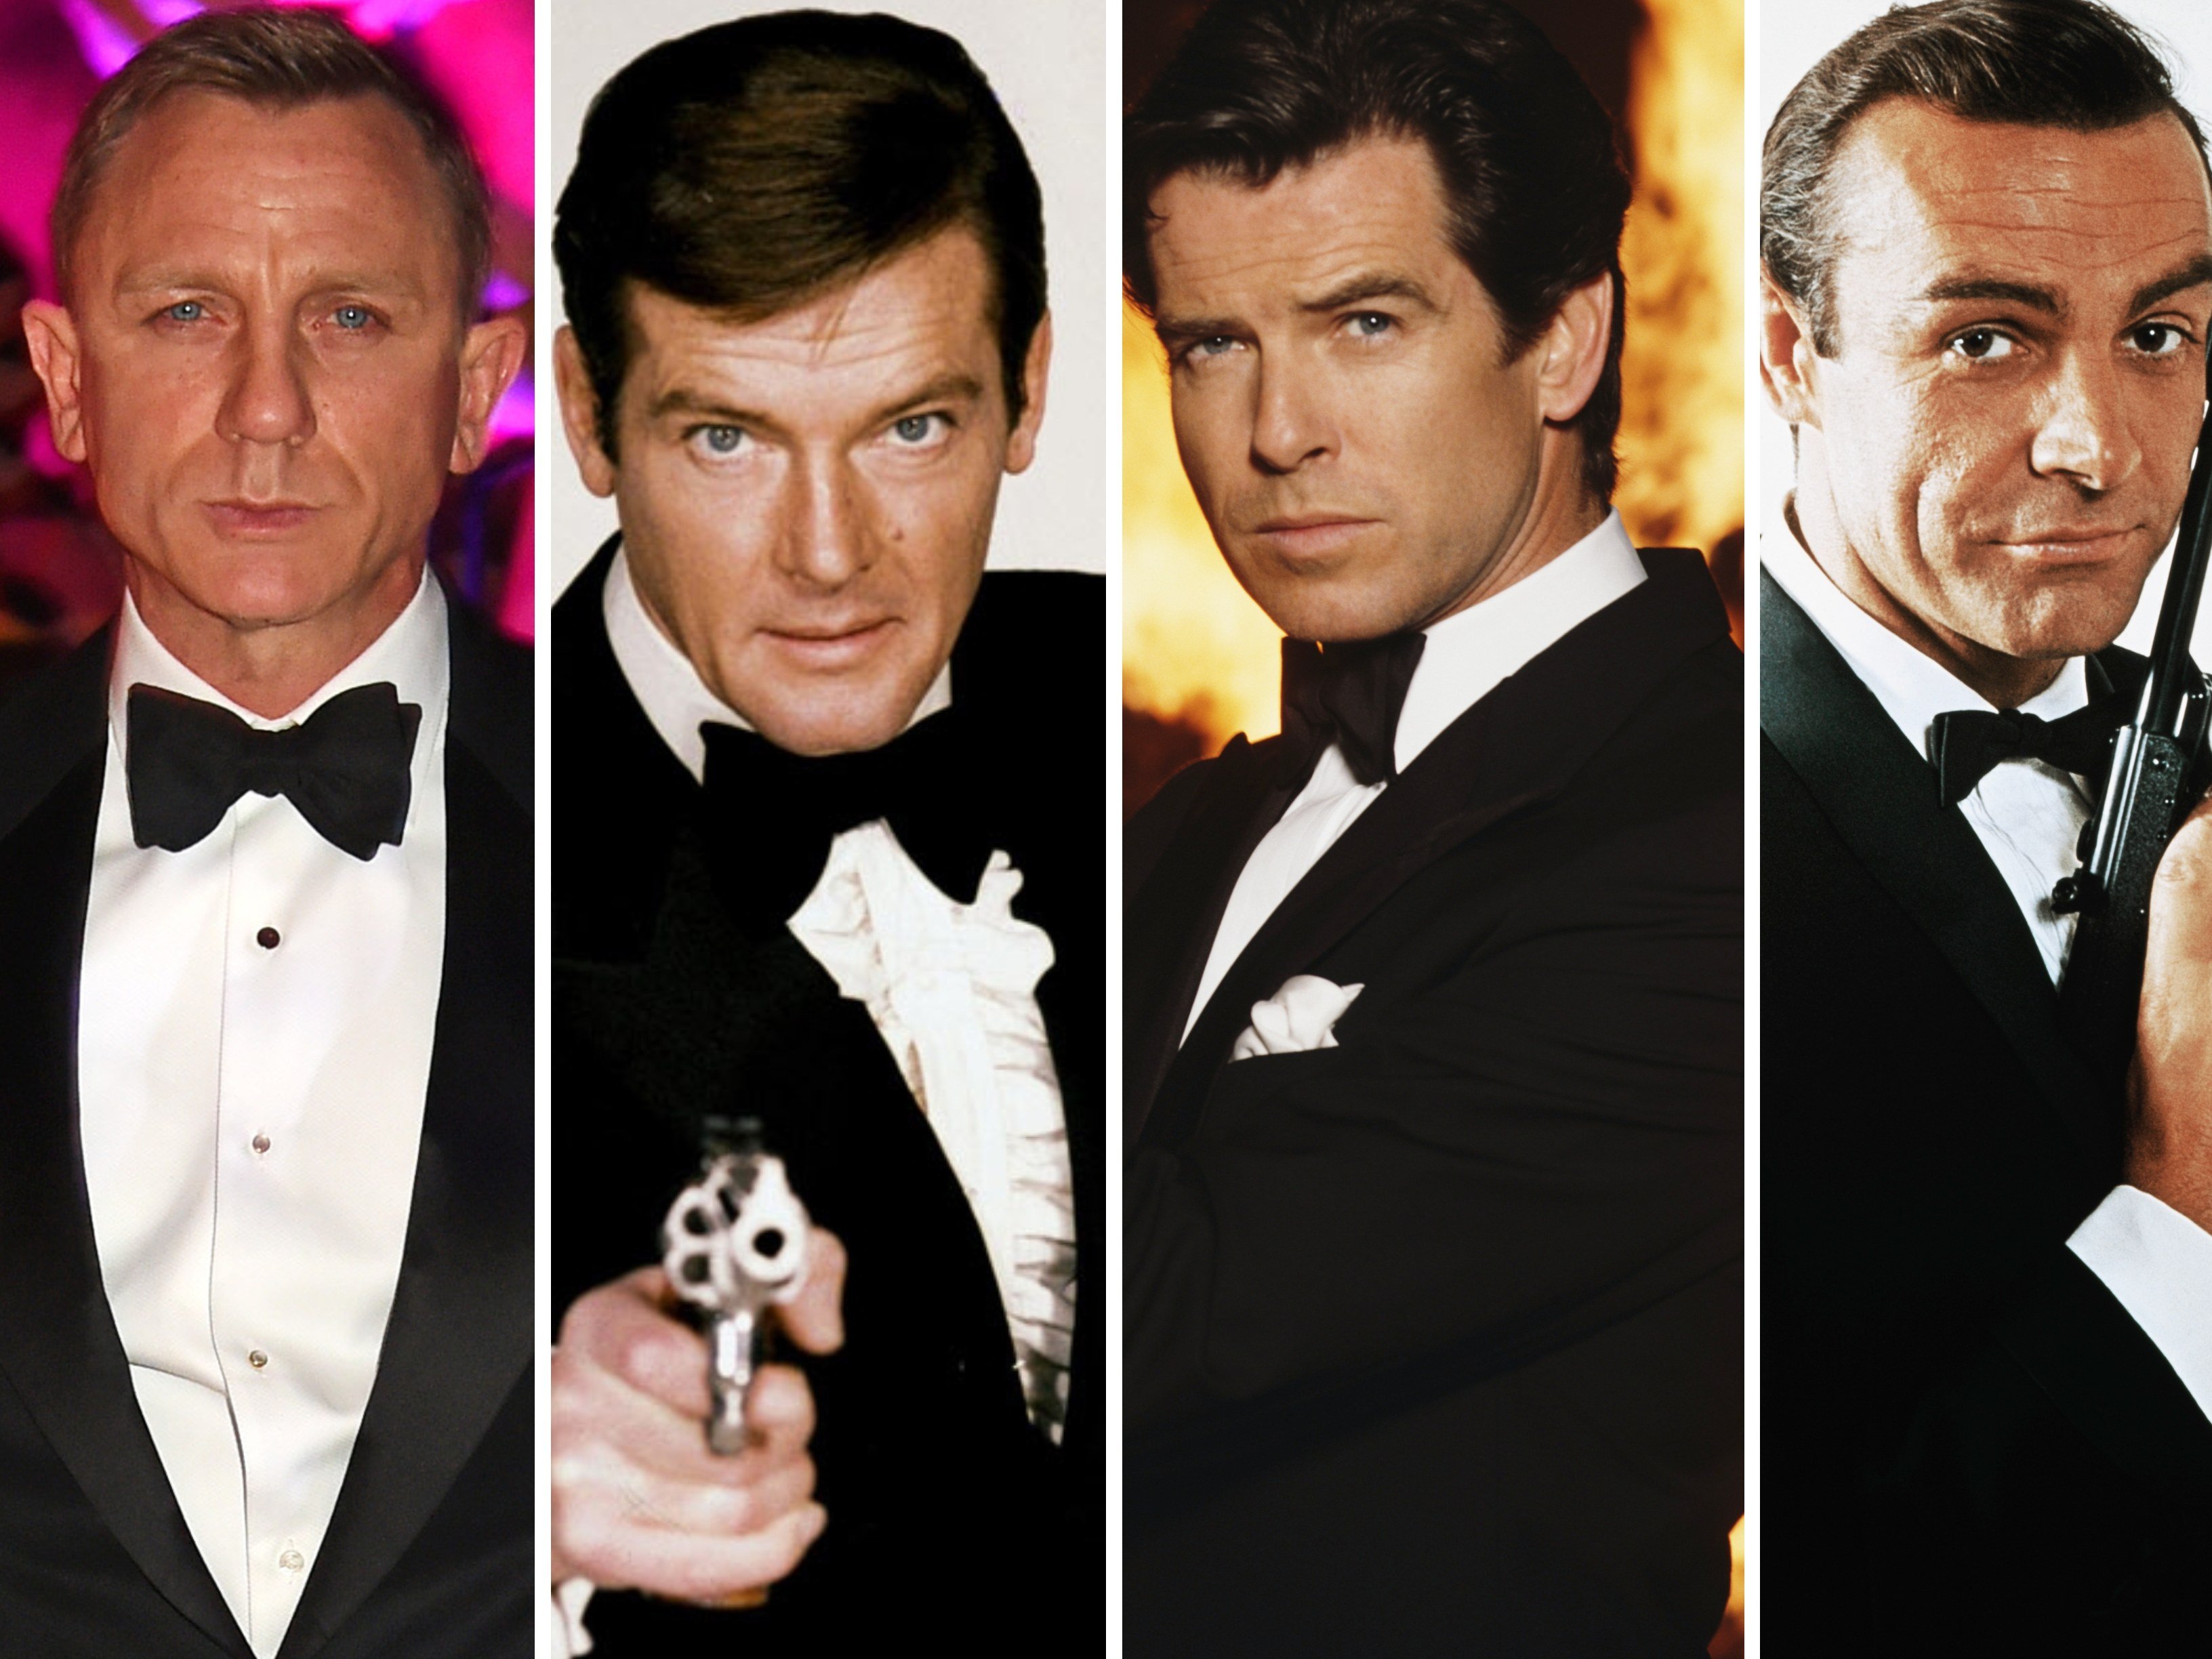 Four of the actors who played James Bond, from left: Daniel Craig, Roger Moore, Pierce Brosnan and Sean Connery. Photos: @tiernysimon/Twitter, Getty Images